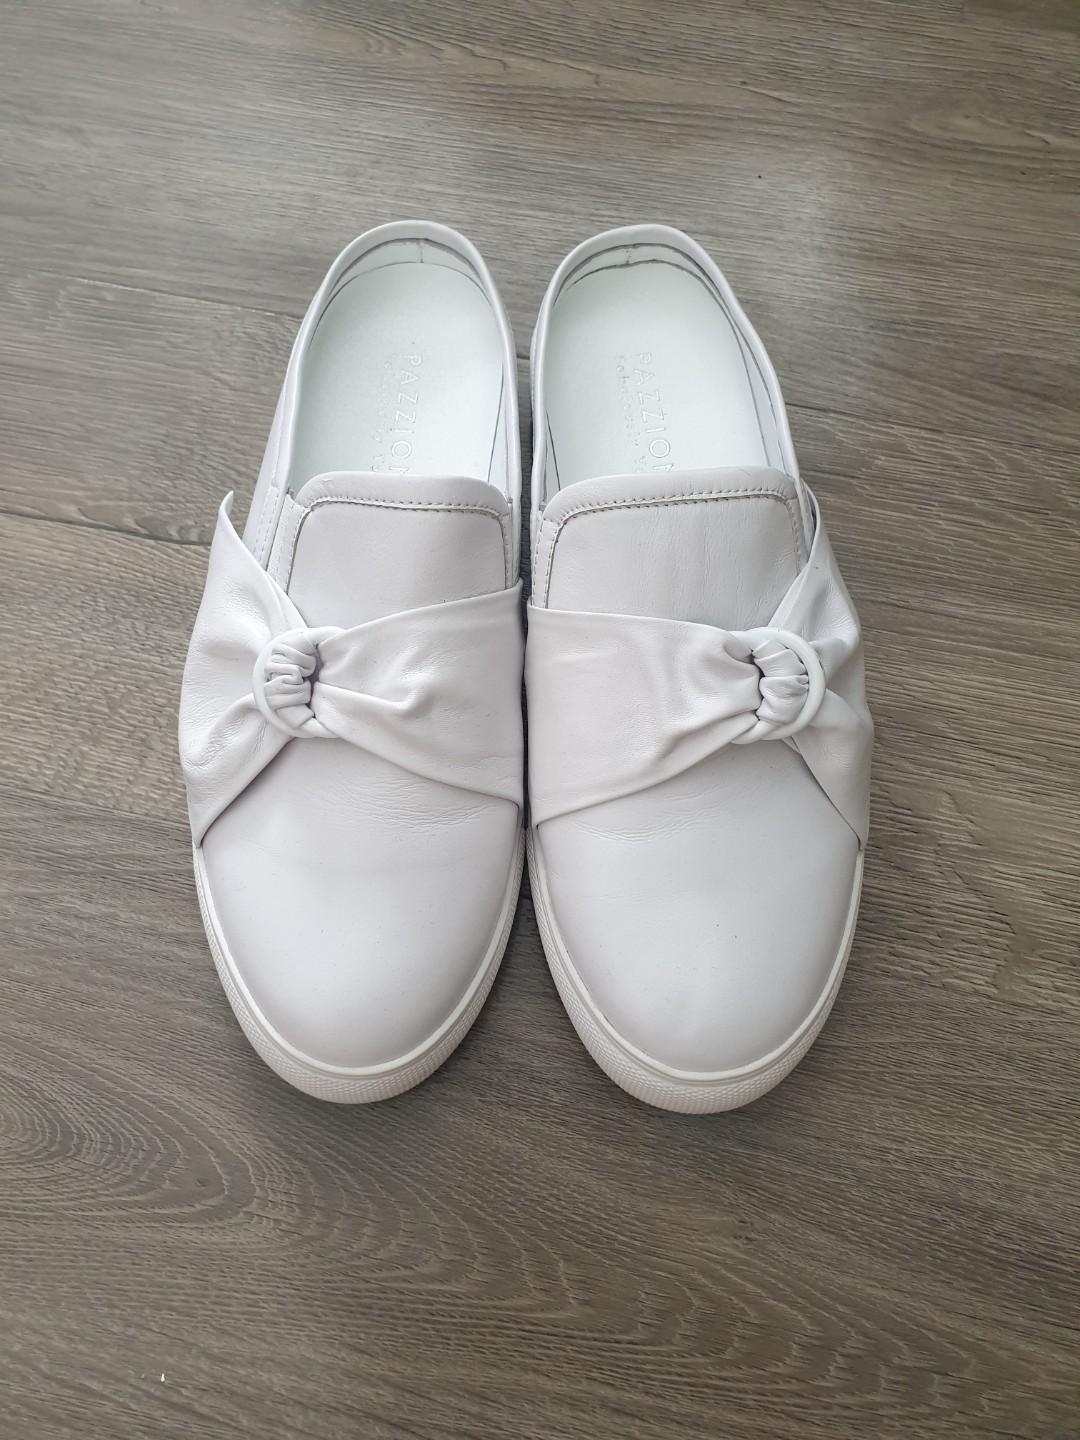 white bow sneakers